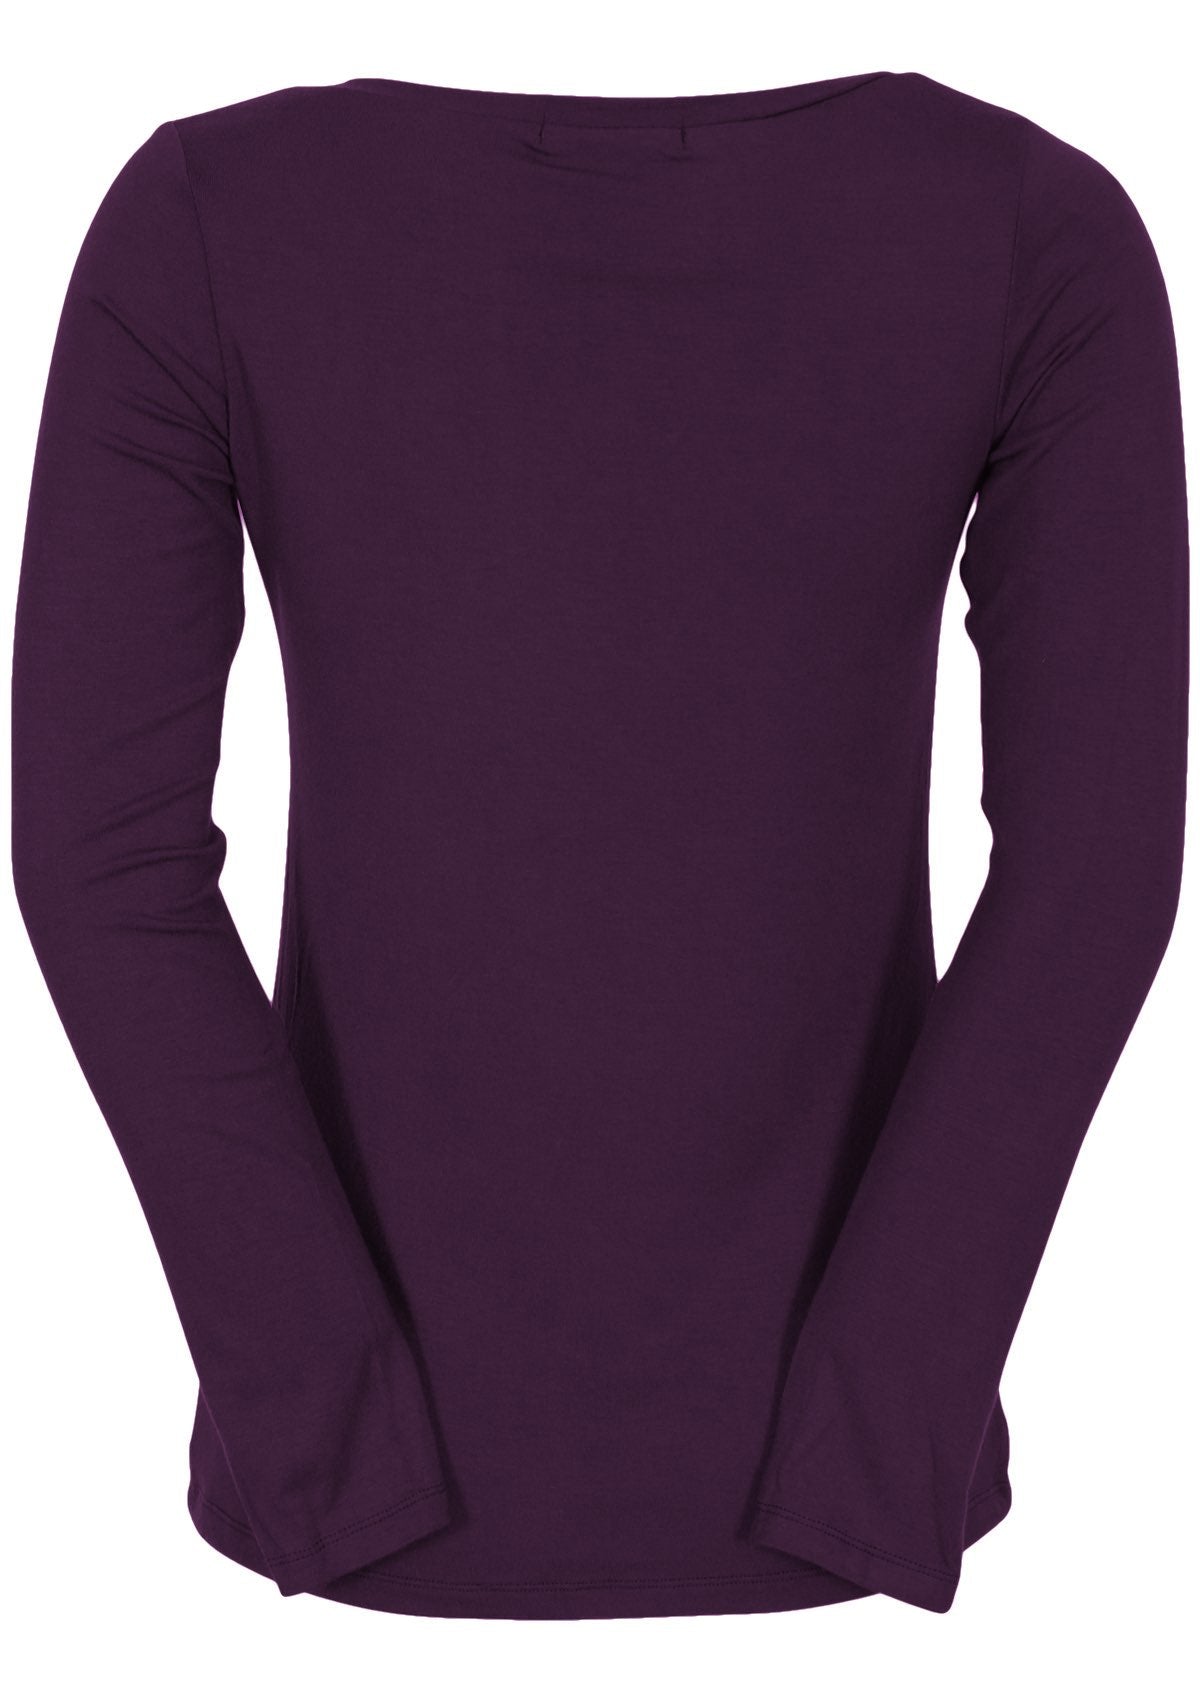 back view fitted long sleeve top purple